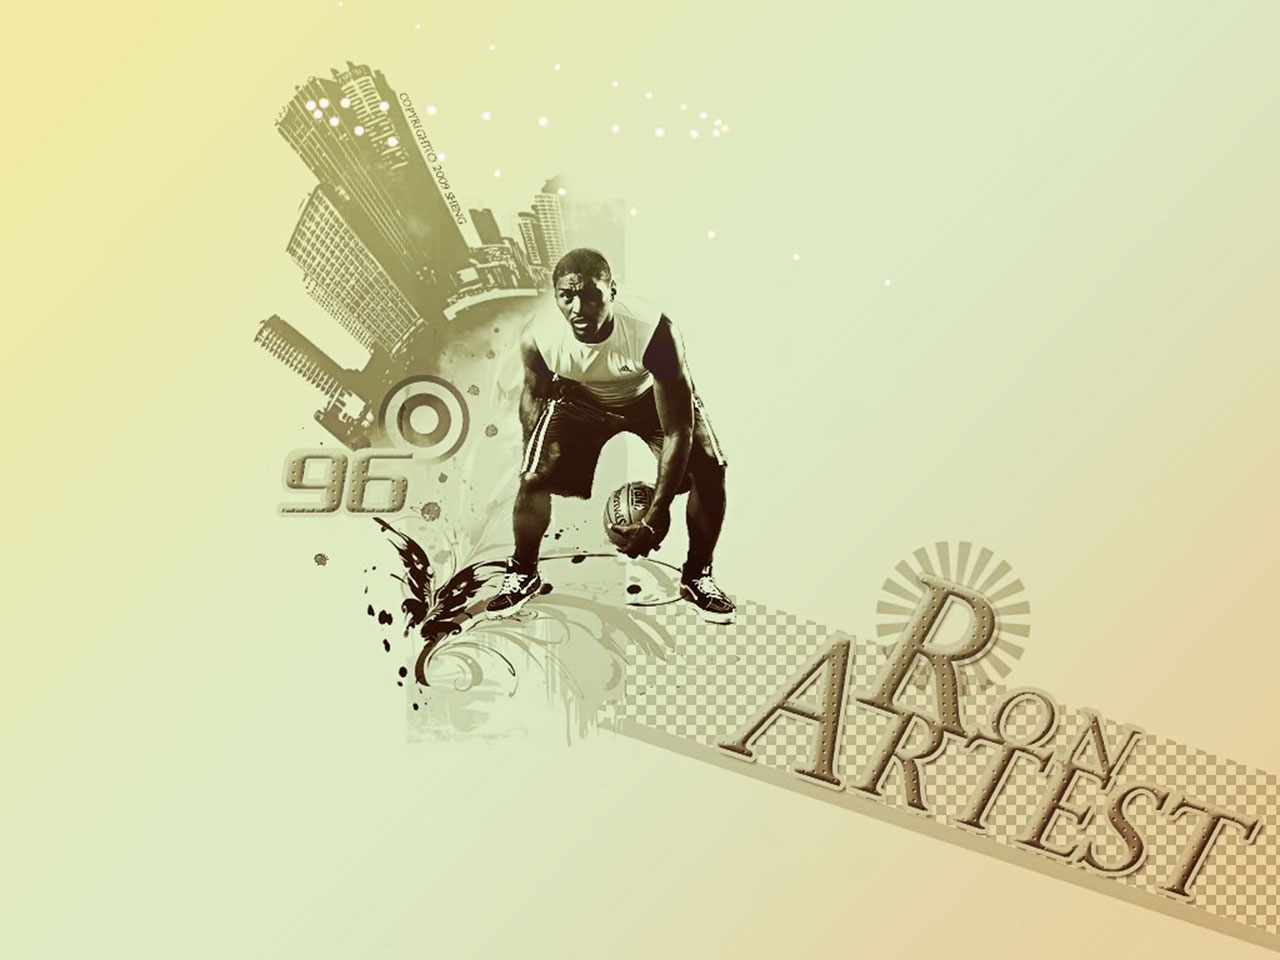 Second Uploaded Wallpaper Is New Of Ron Artest Who S